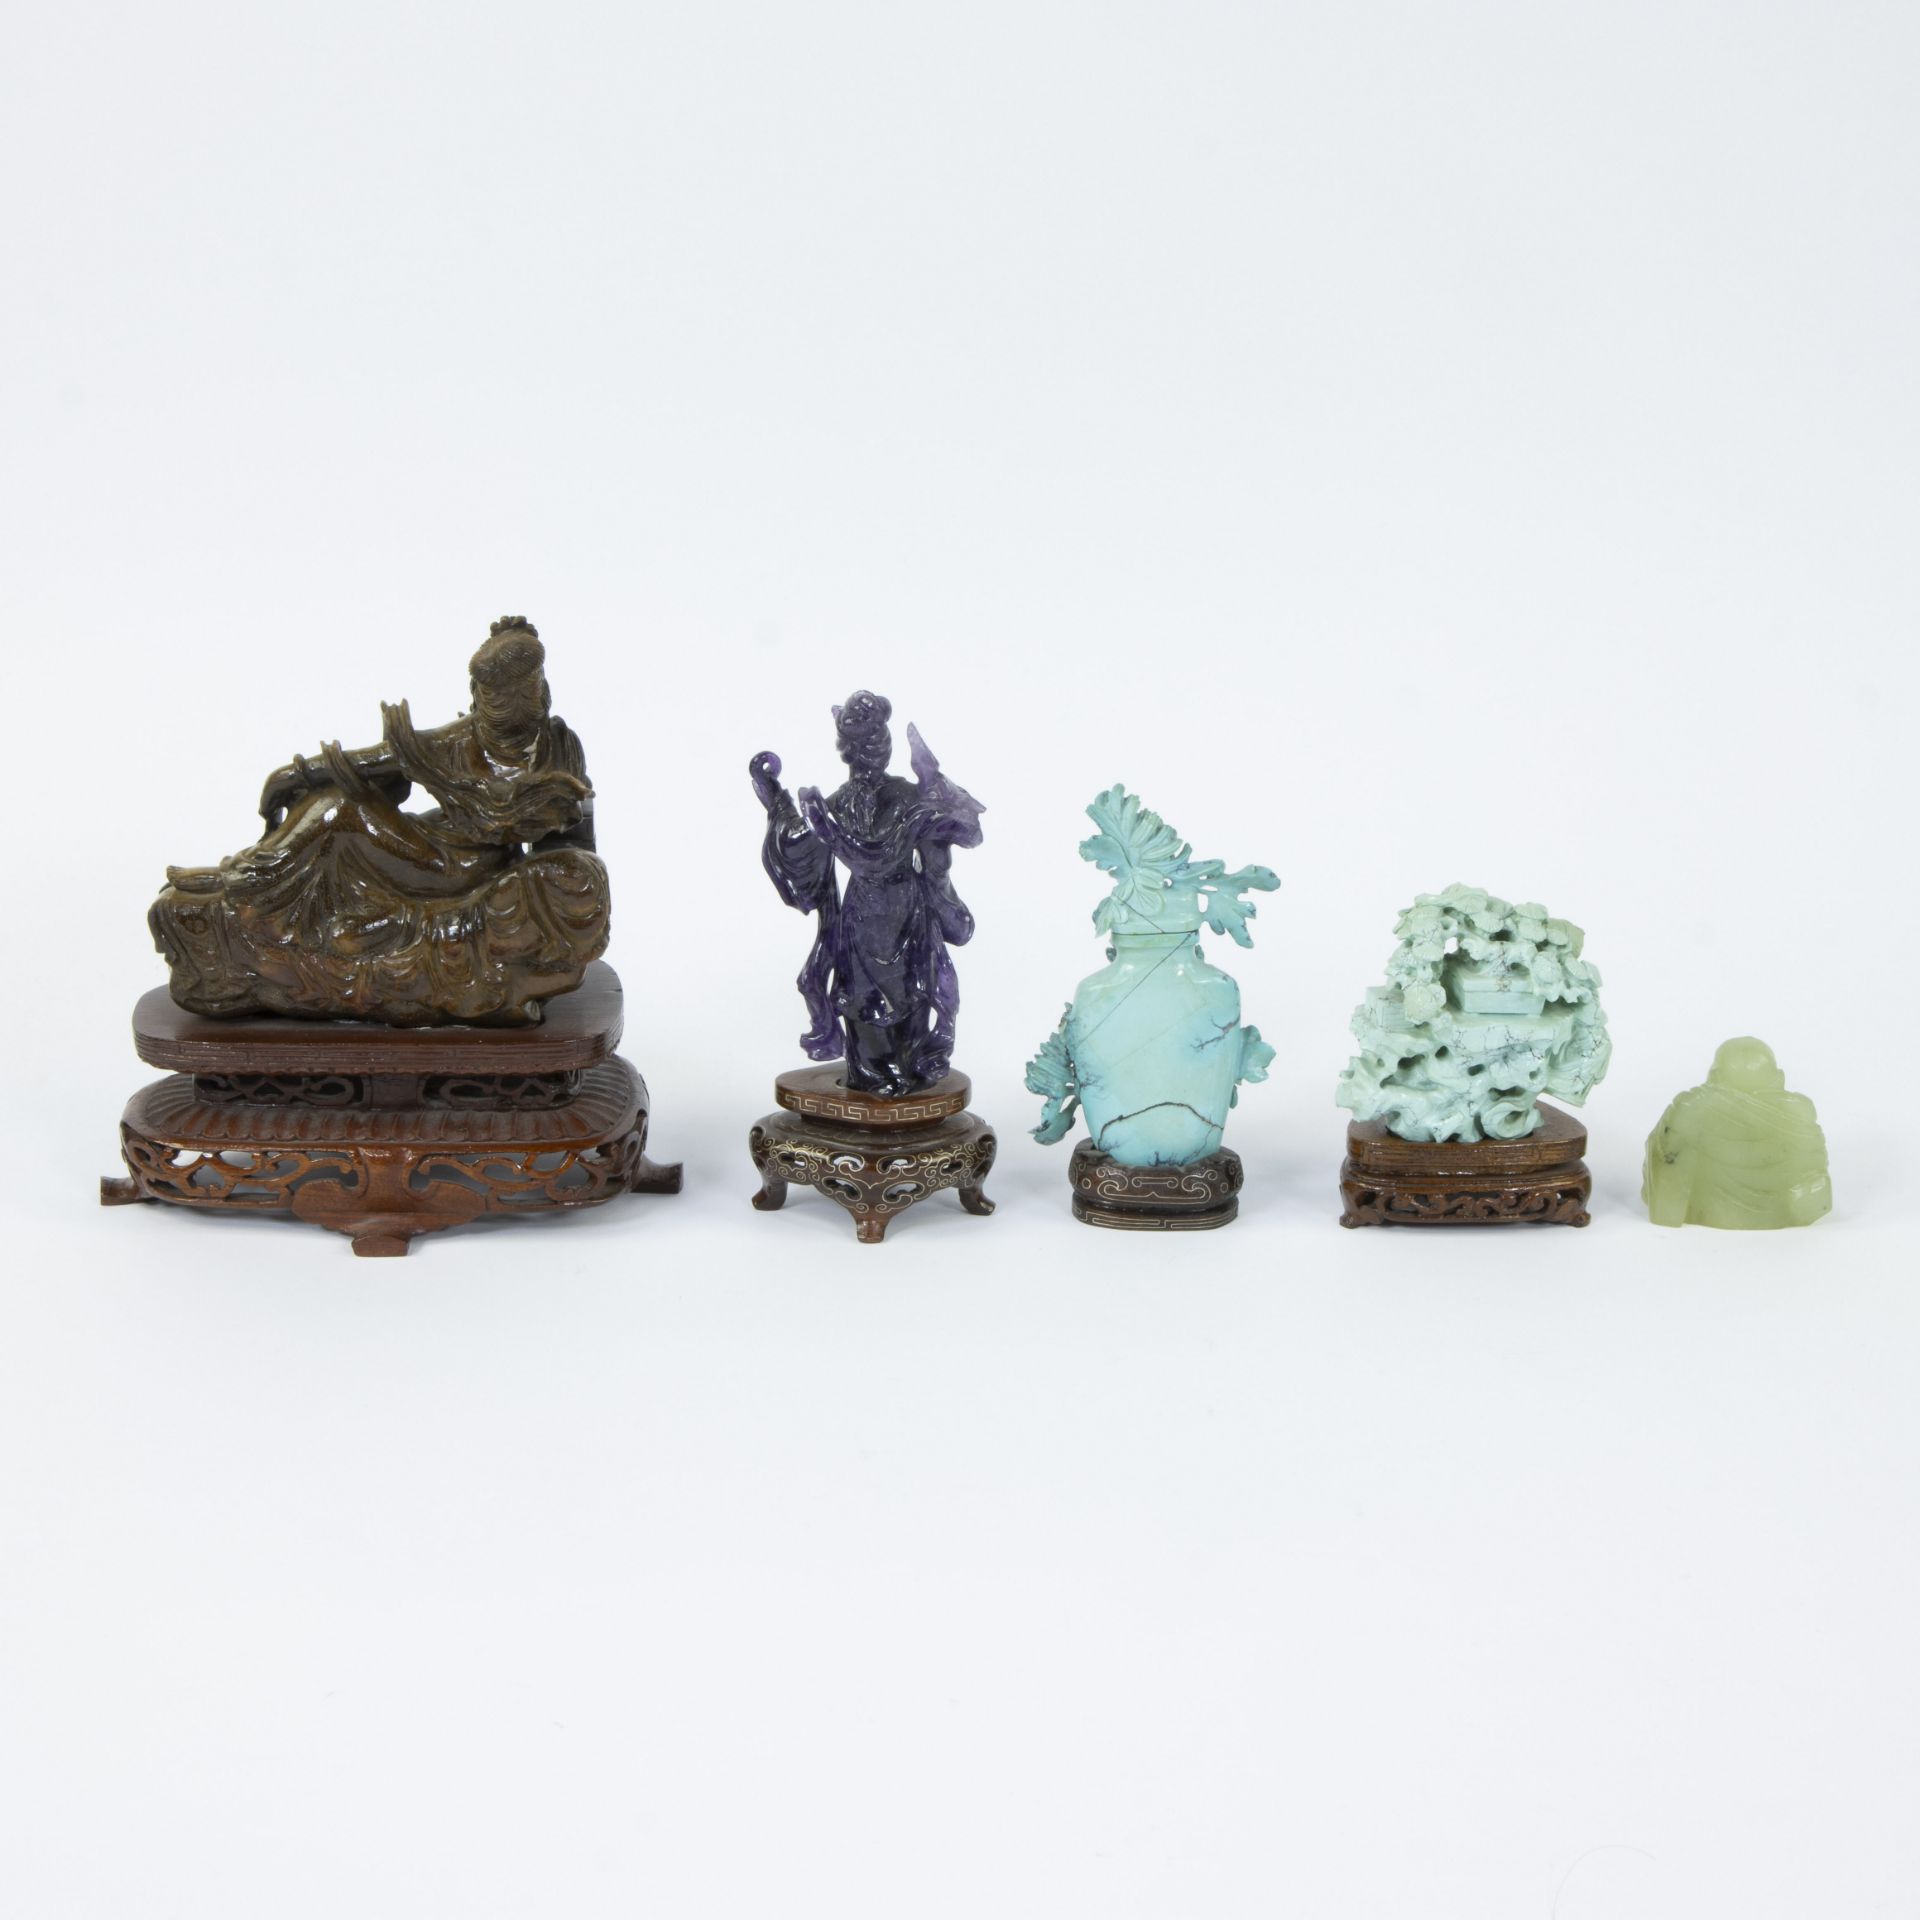 5 Chinese figurines in tiger eye, amethyst, howlite and serpentine - Image 3 of 4